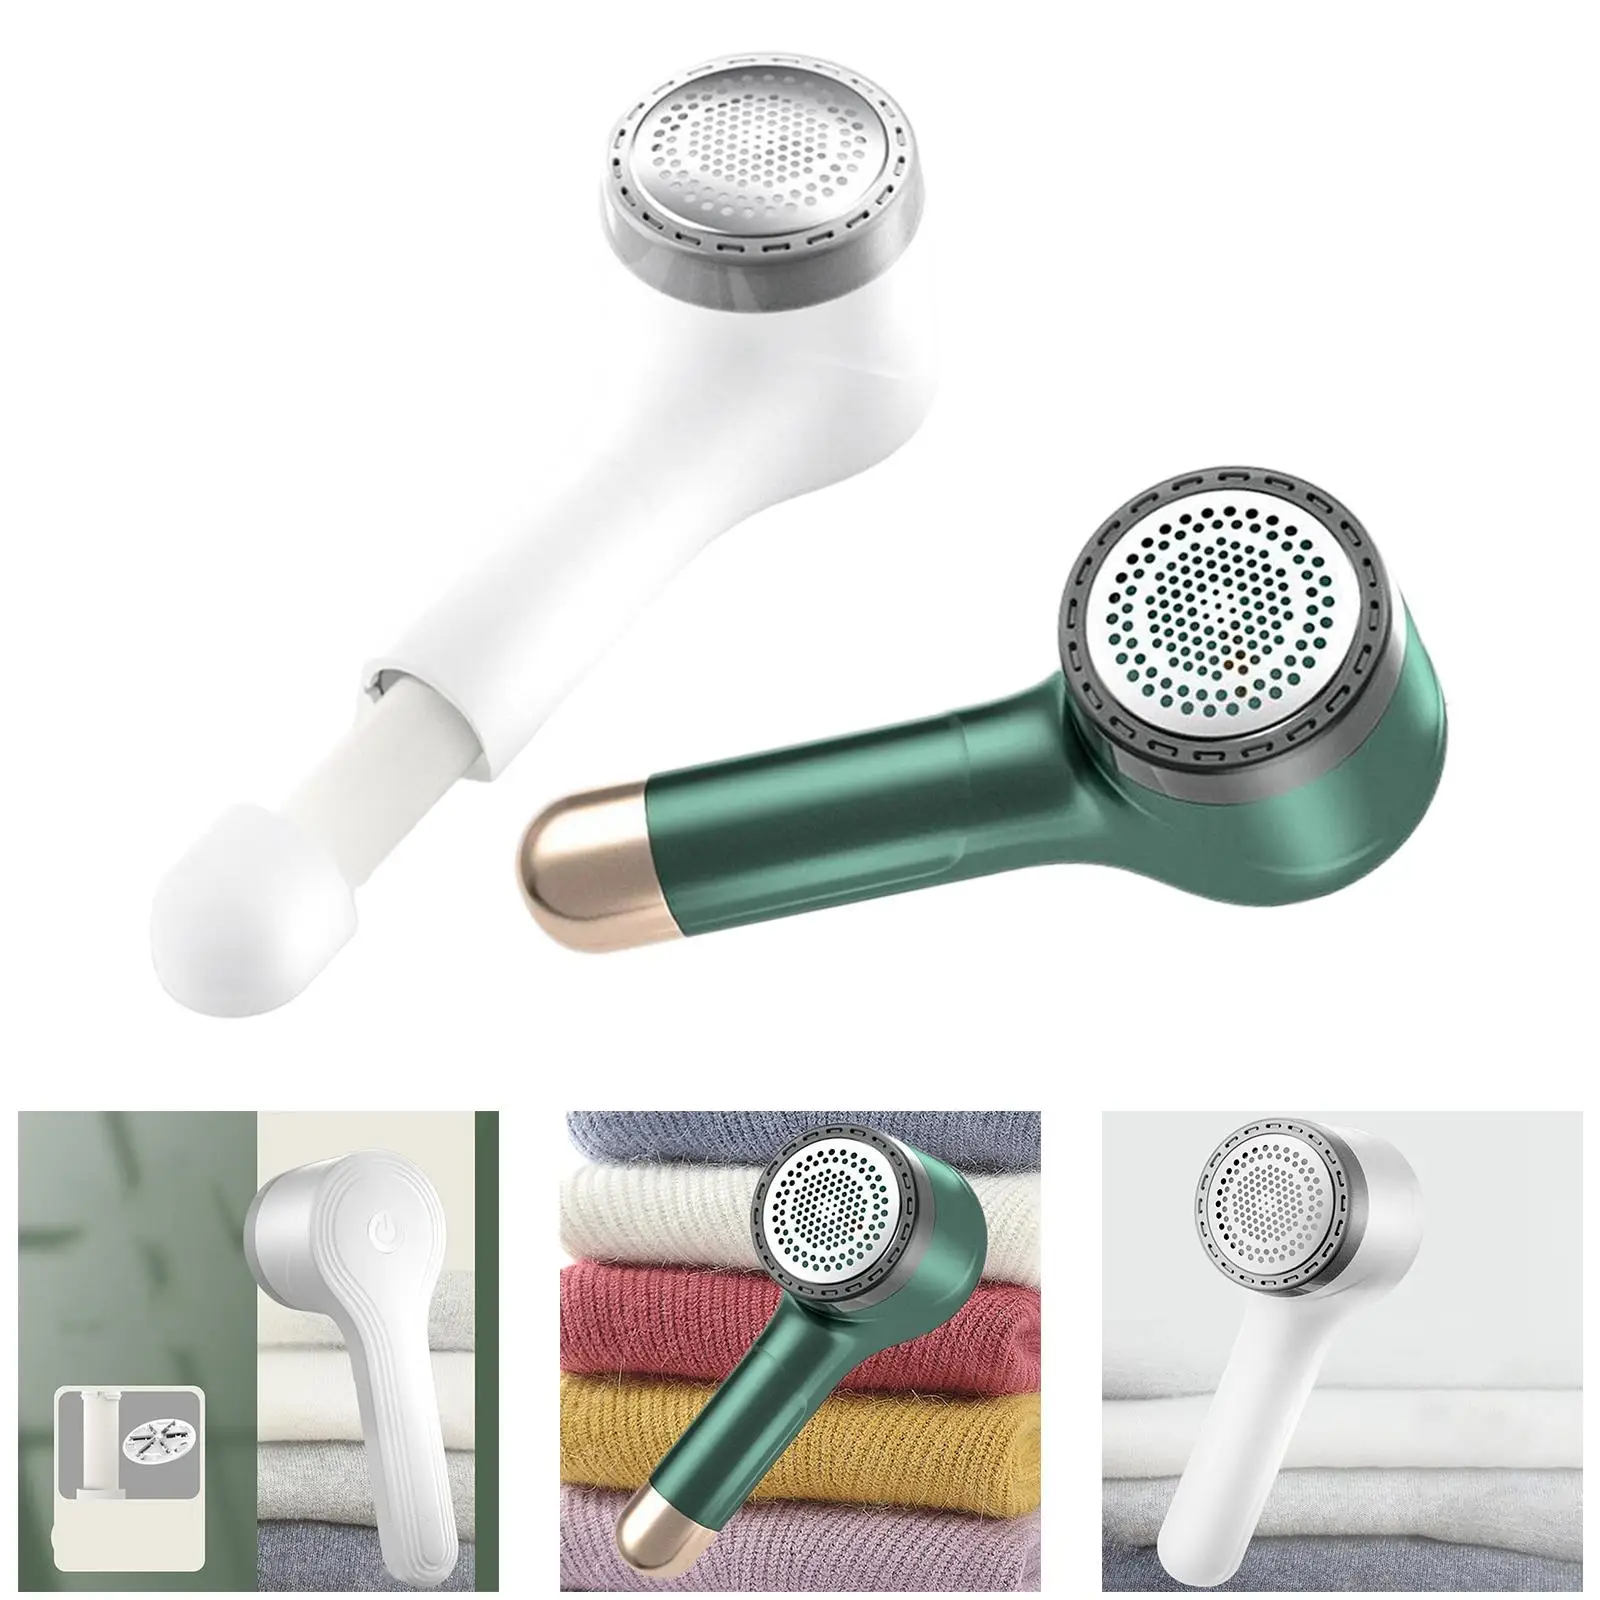 Lint Remover Removal Tool Remove Quickly Removing Sweater Shaver for Clothing Cotton Cashmere